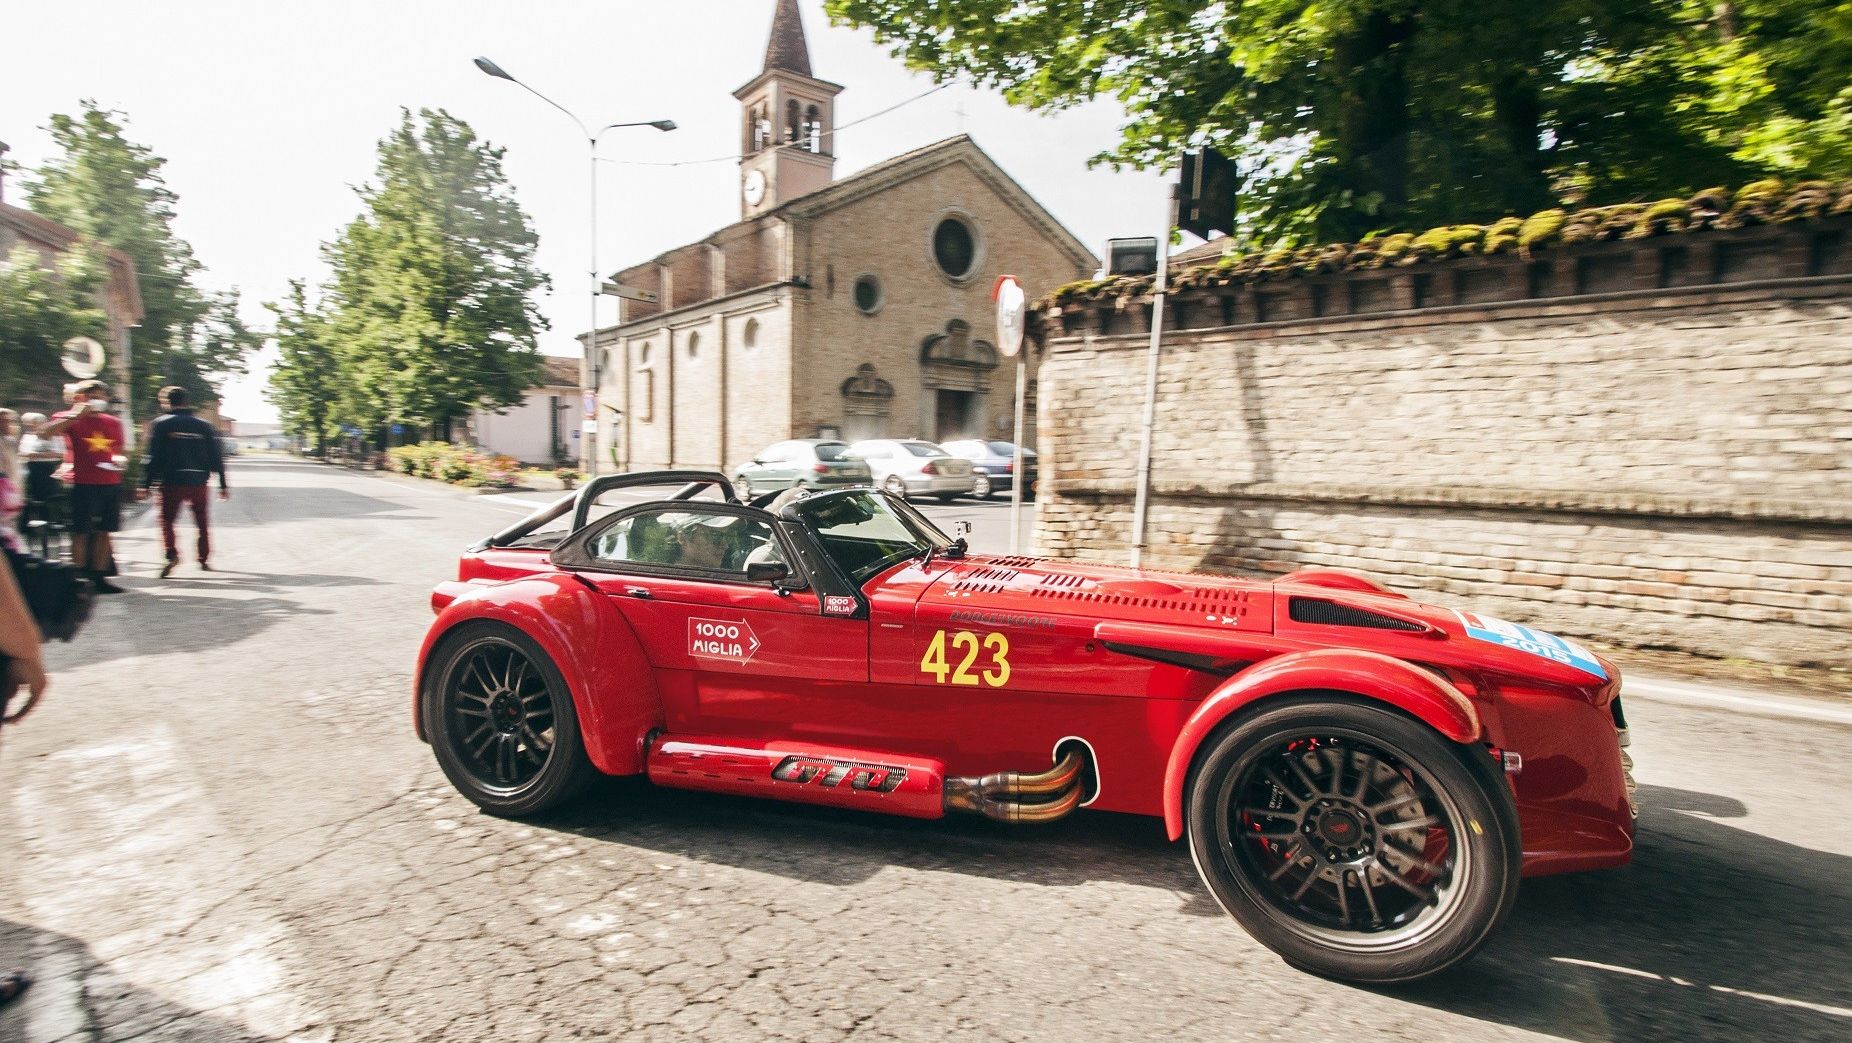 2016 Donkervoort D8 GTO 1000 Miglia Edition